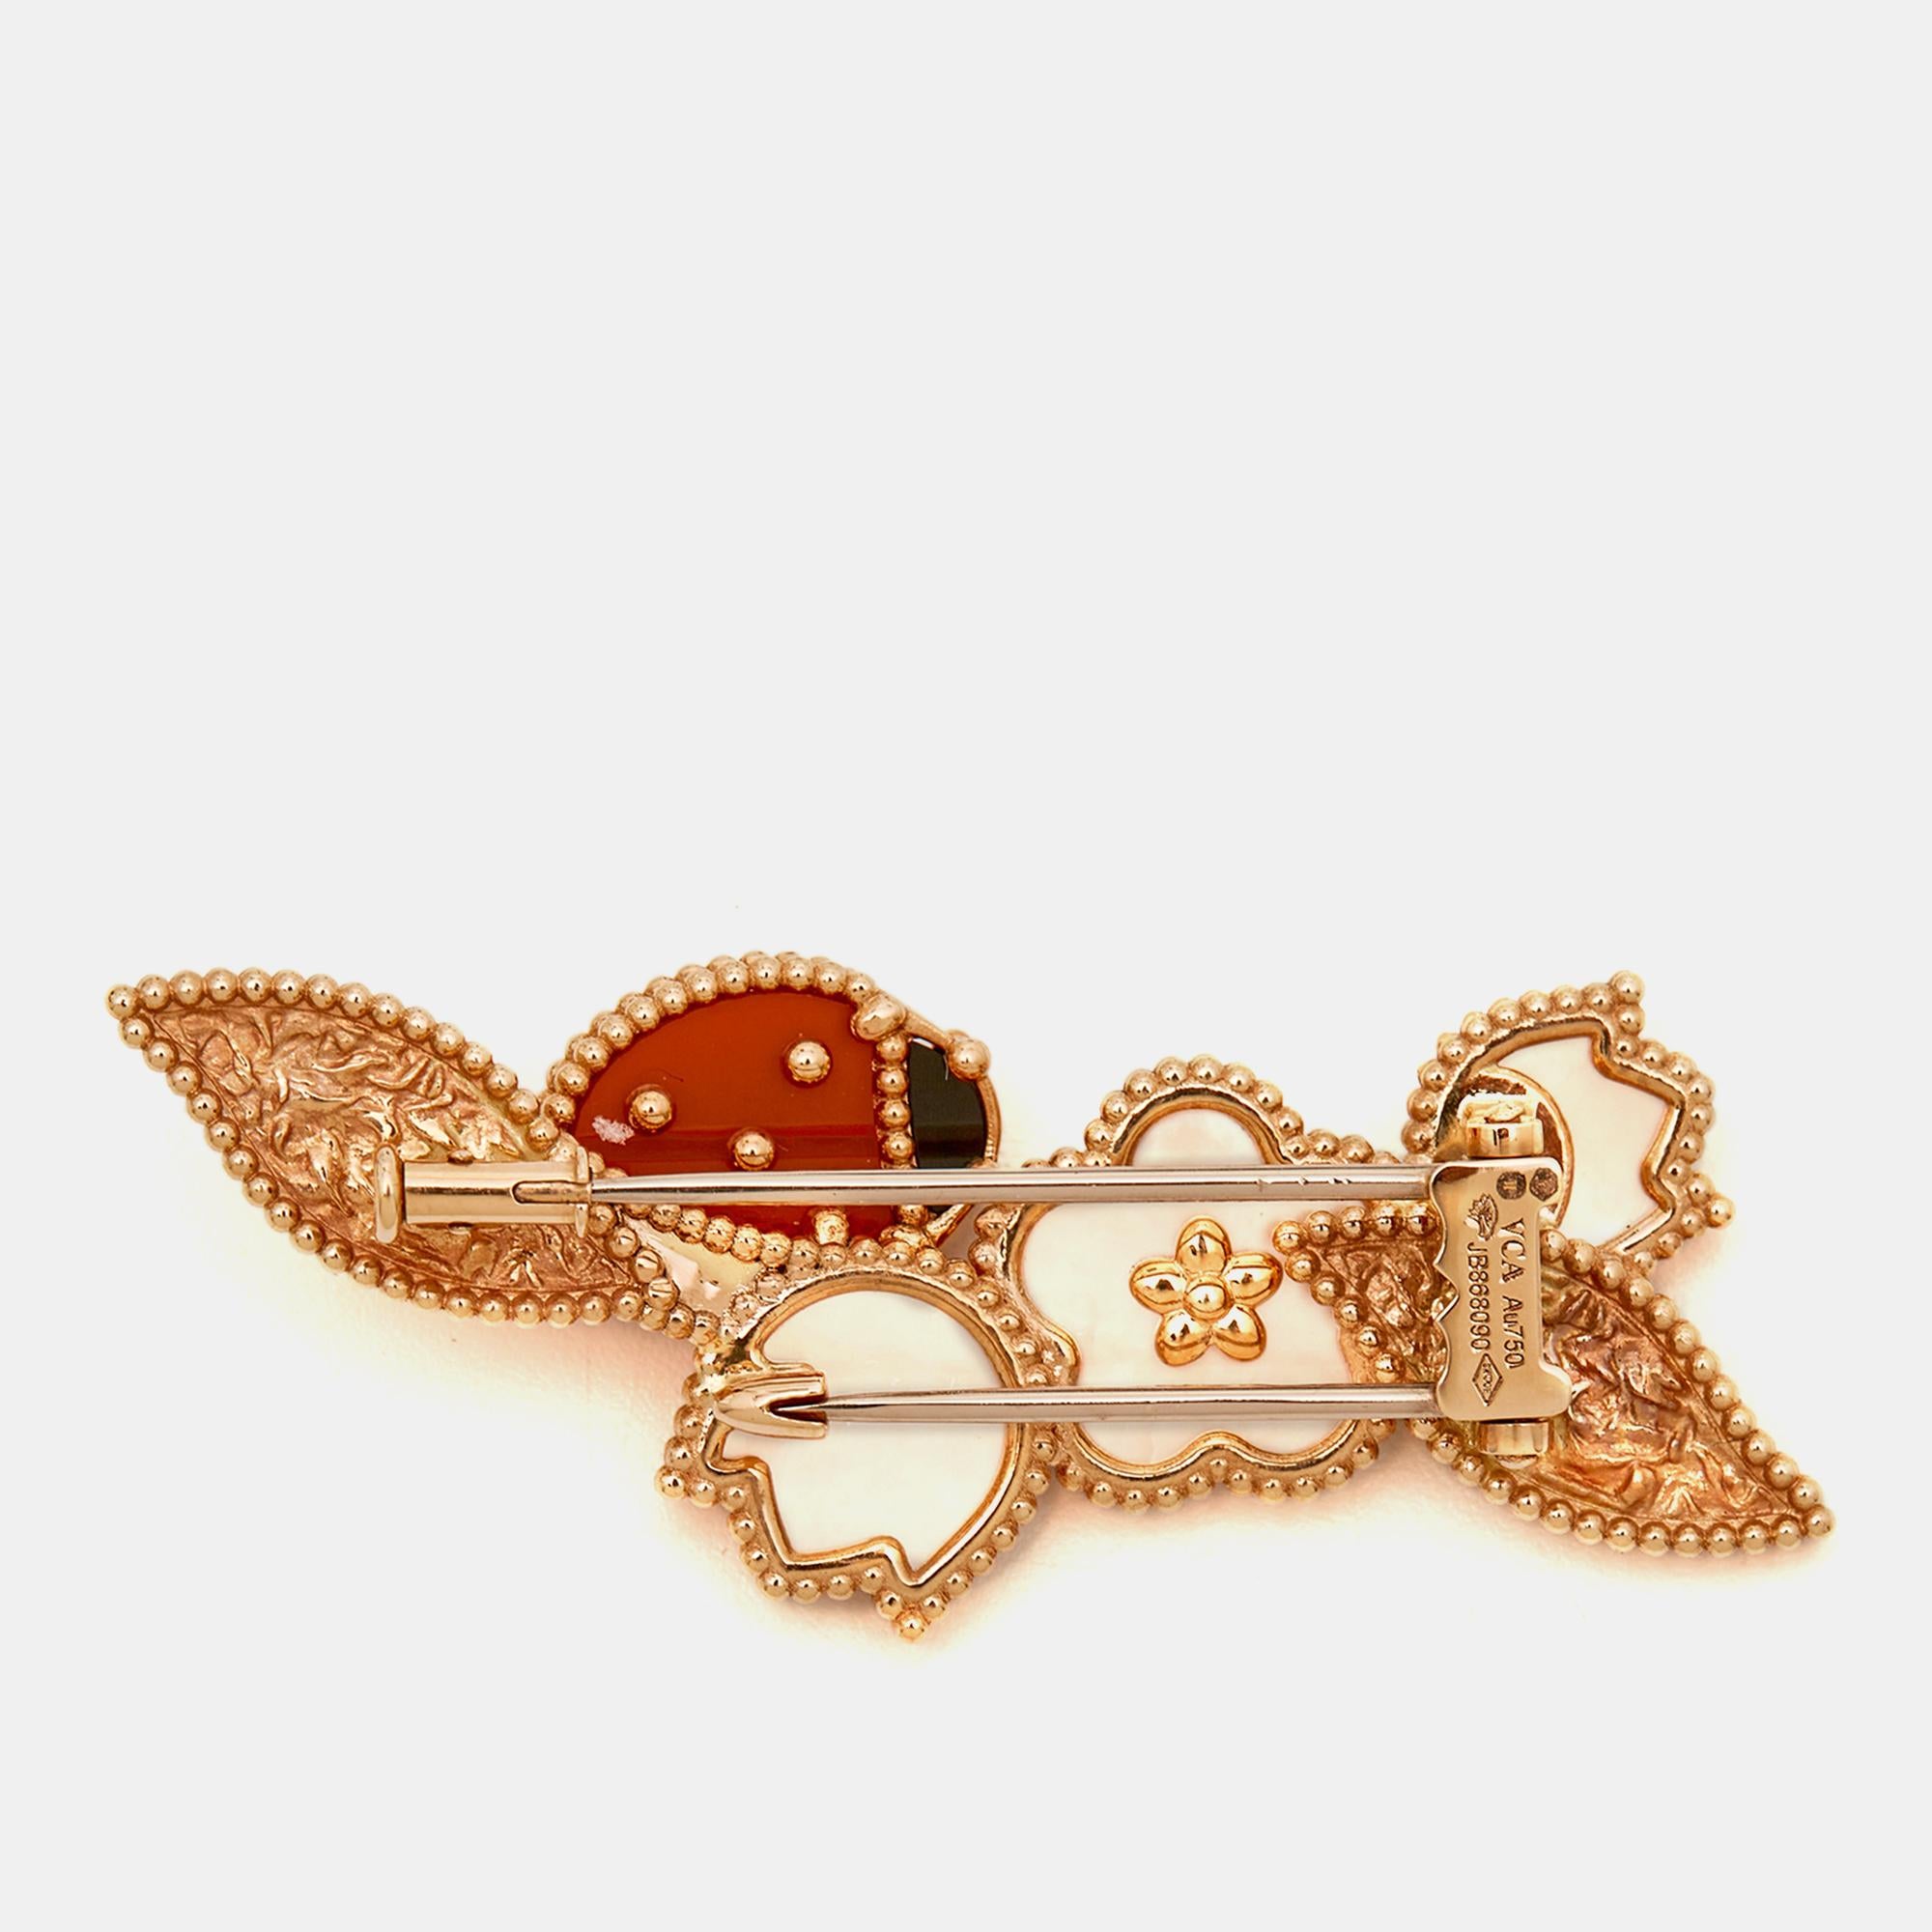 The Van Cleef & Arpels Lucky Spring brooch is an exquisite piece of jewelry featuring an array of vibrant gemstones set in 18k rose gold. The design exudes elegance and charm, making it a timeless and luxurious accessory.

Includes: Original Box,